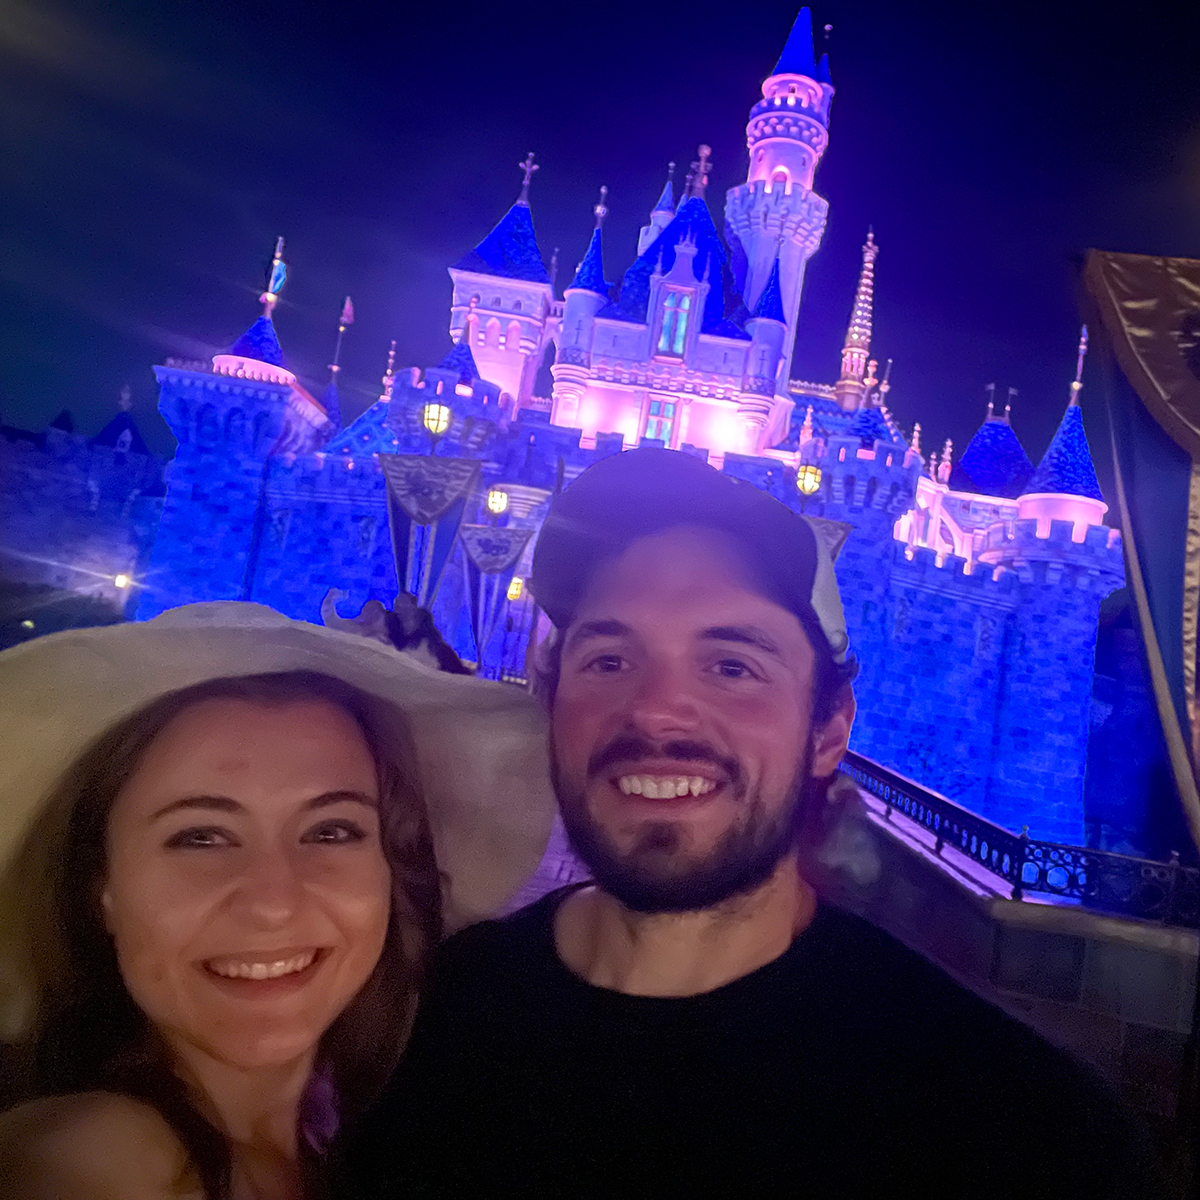 Annie and Scott standing in front of the Cinderella castle at night.